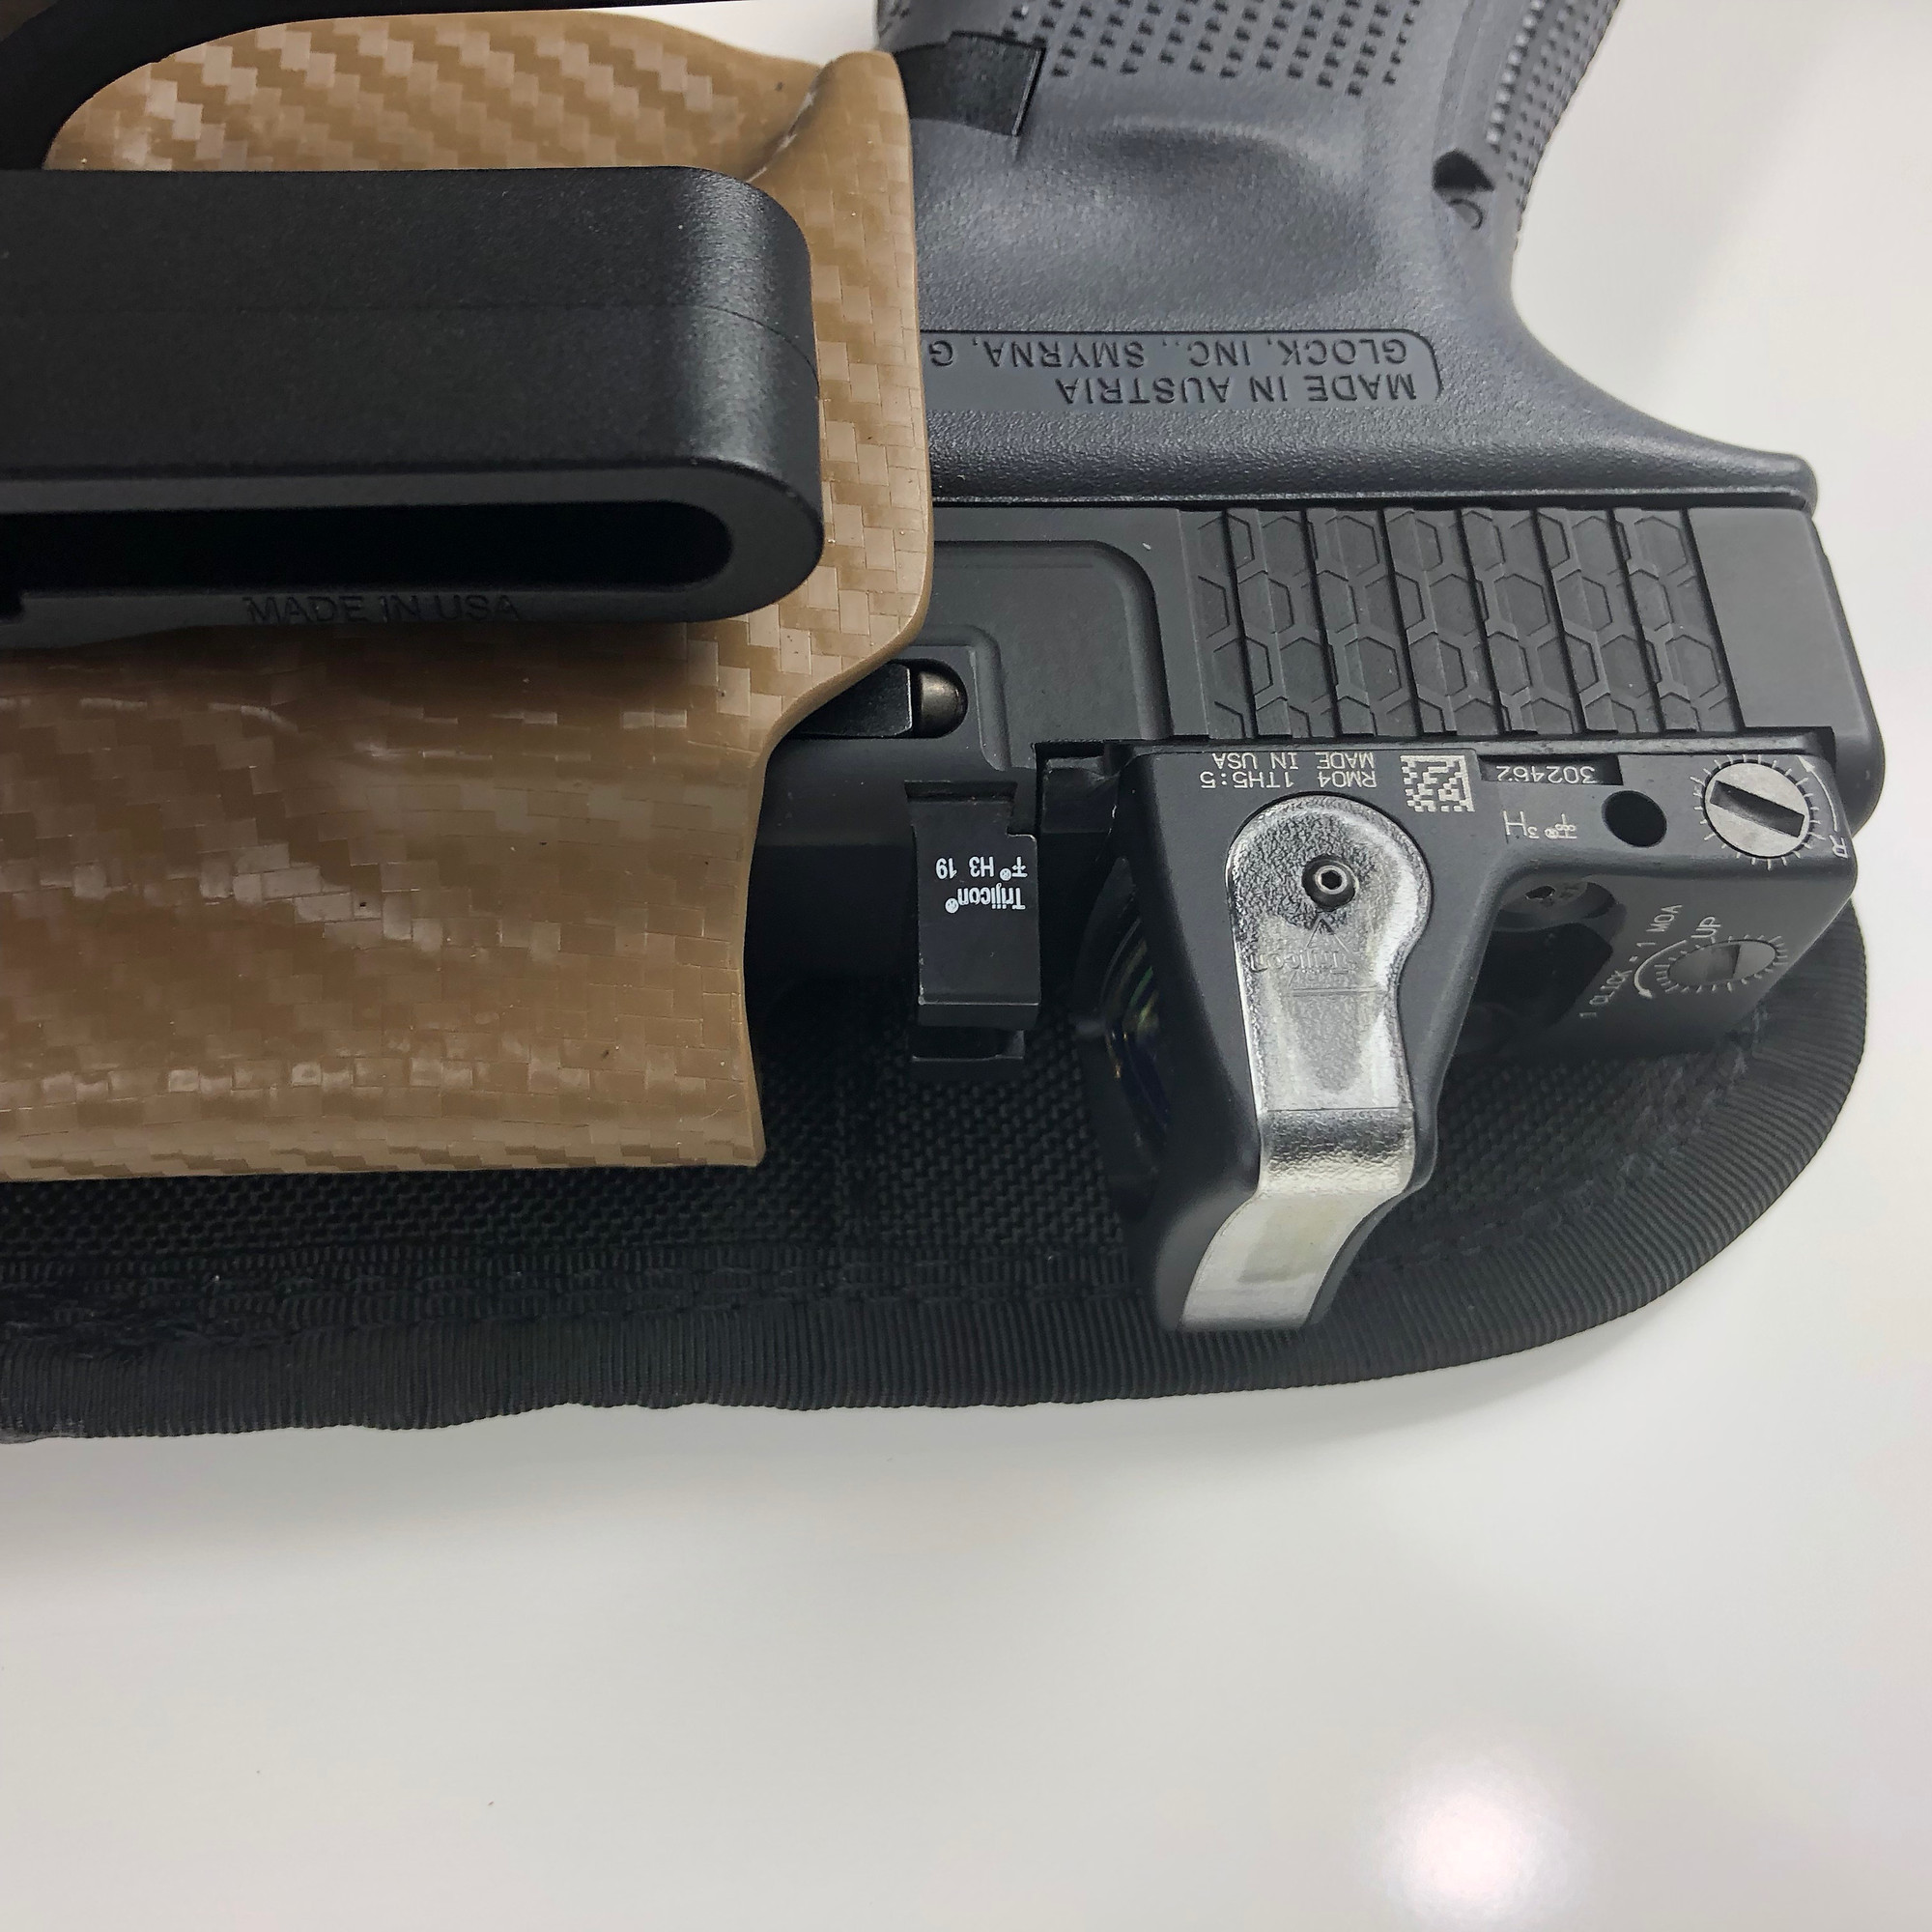 Inside the Waistband Holster - Complete Weapon Solutions